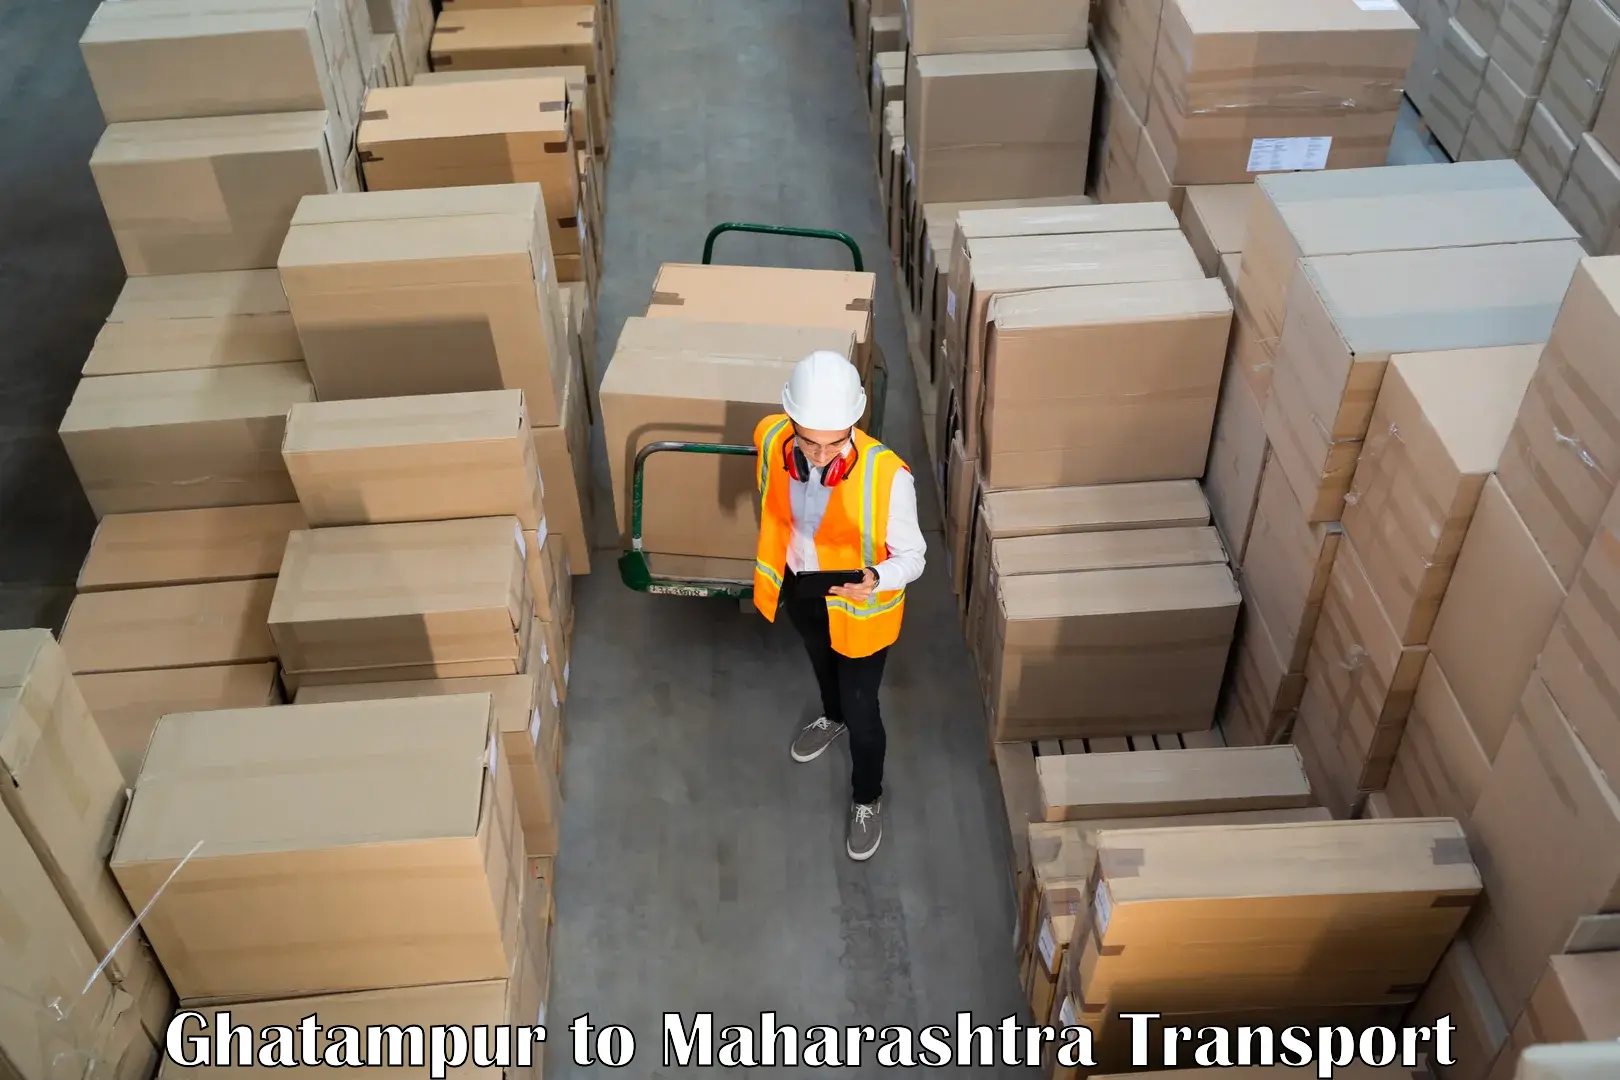 Parcel transport services in Ghatampur to Mahur